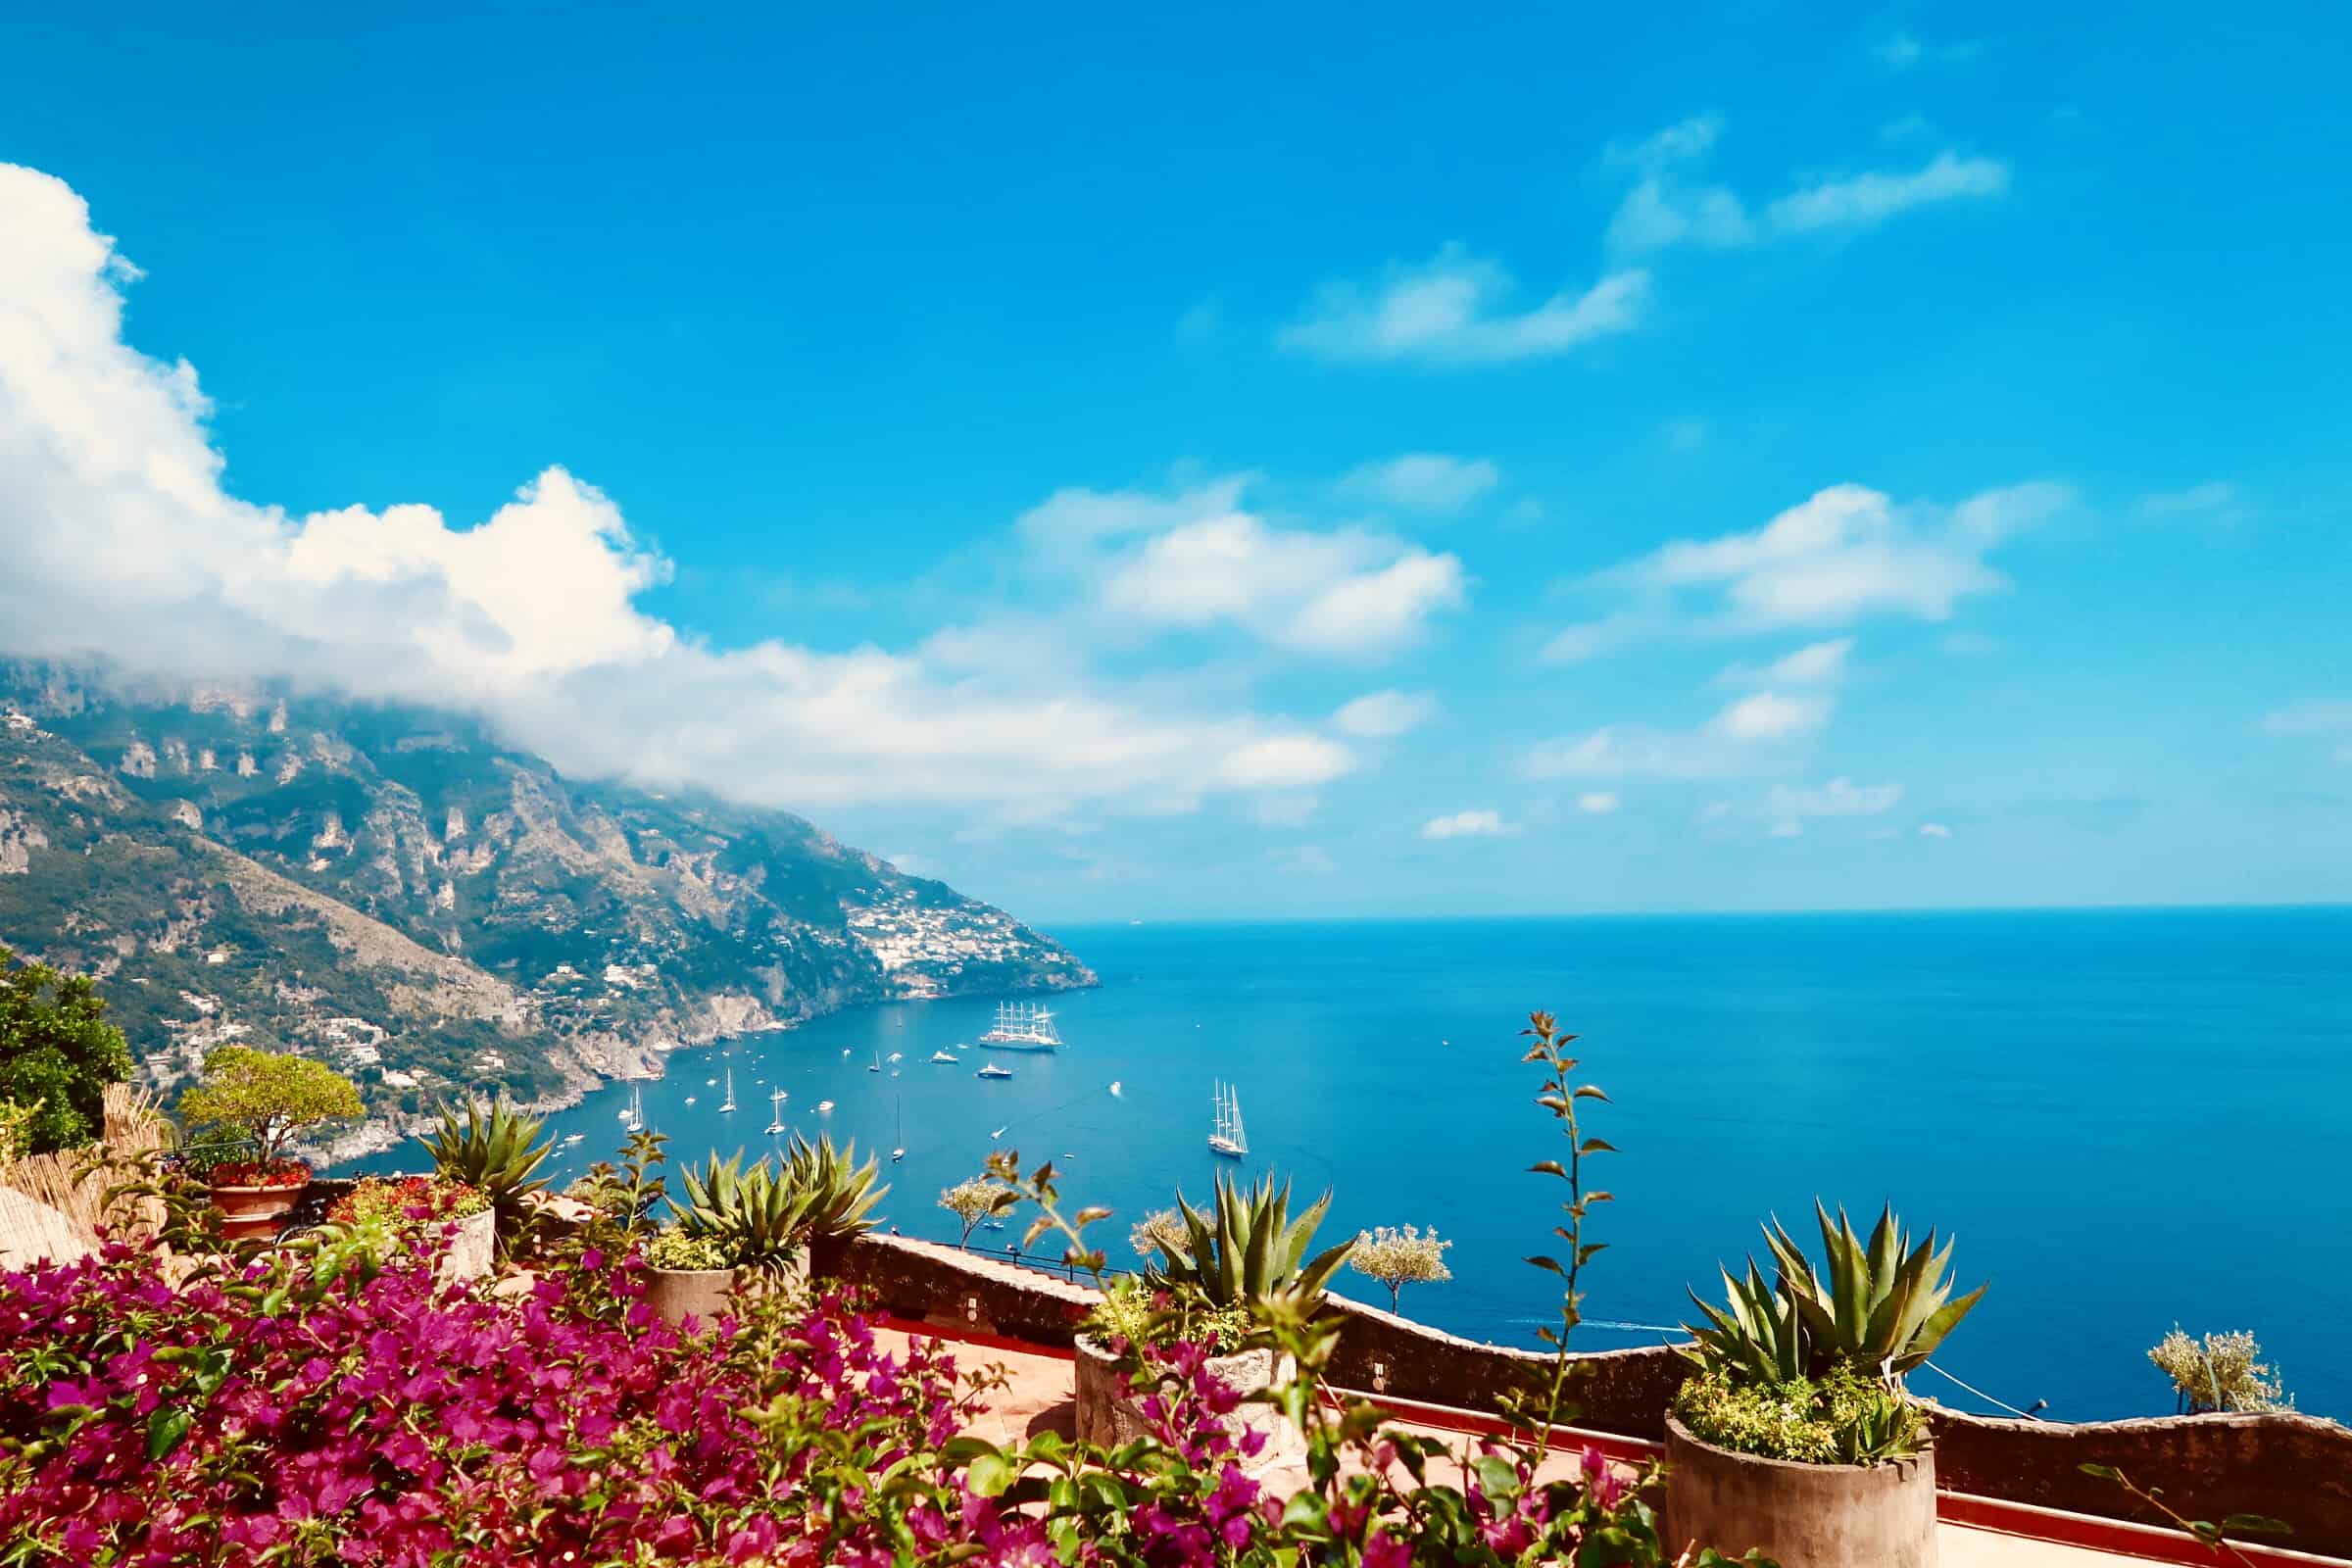 Amalfi Coast - Best cities to visit in Italy